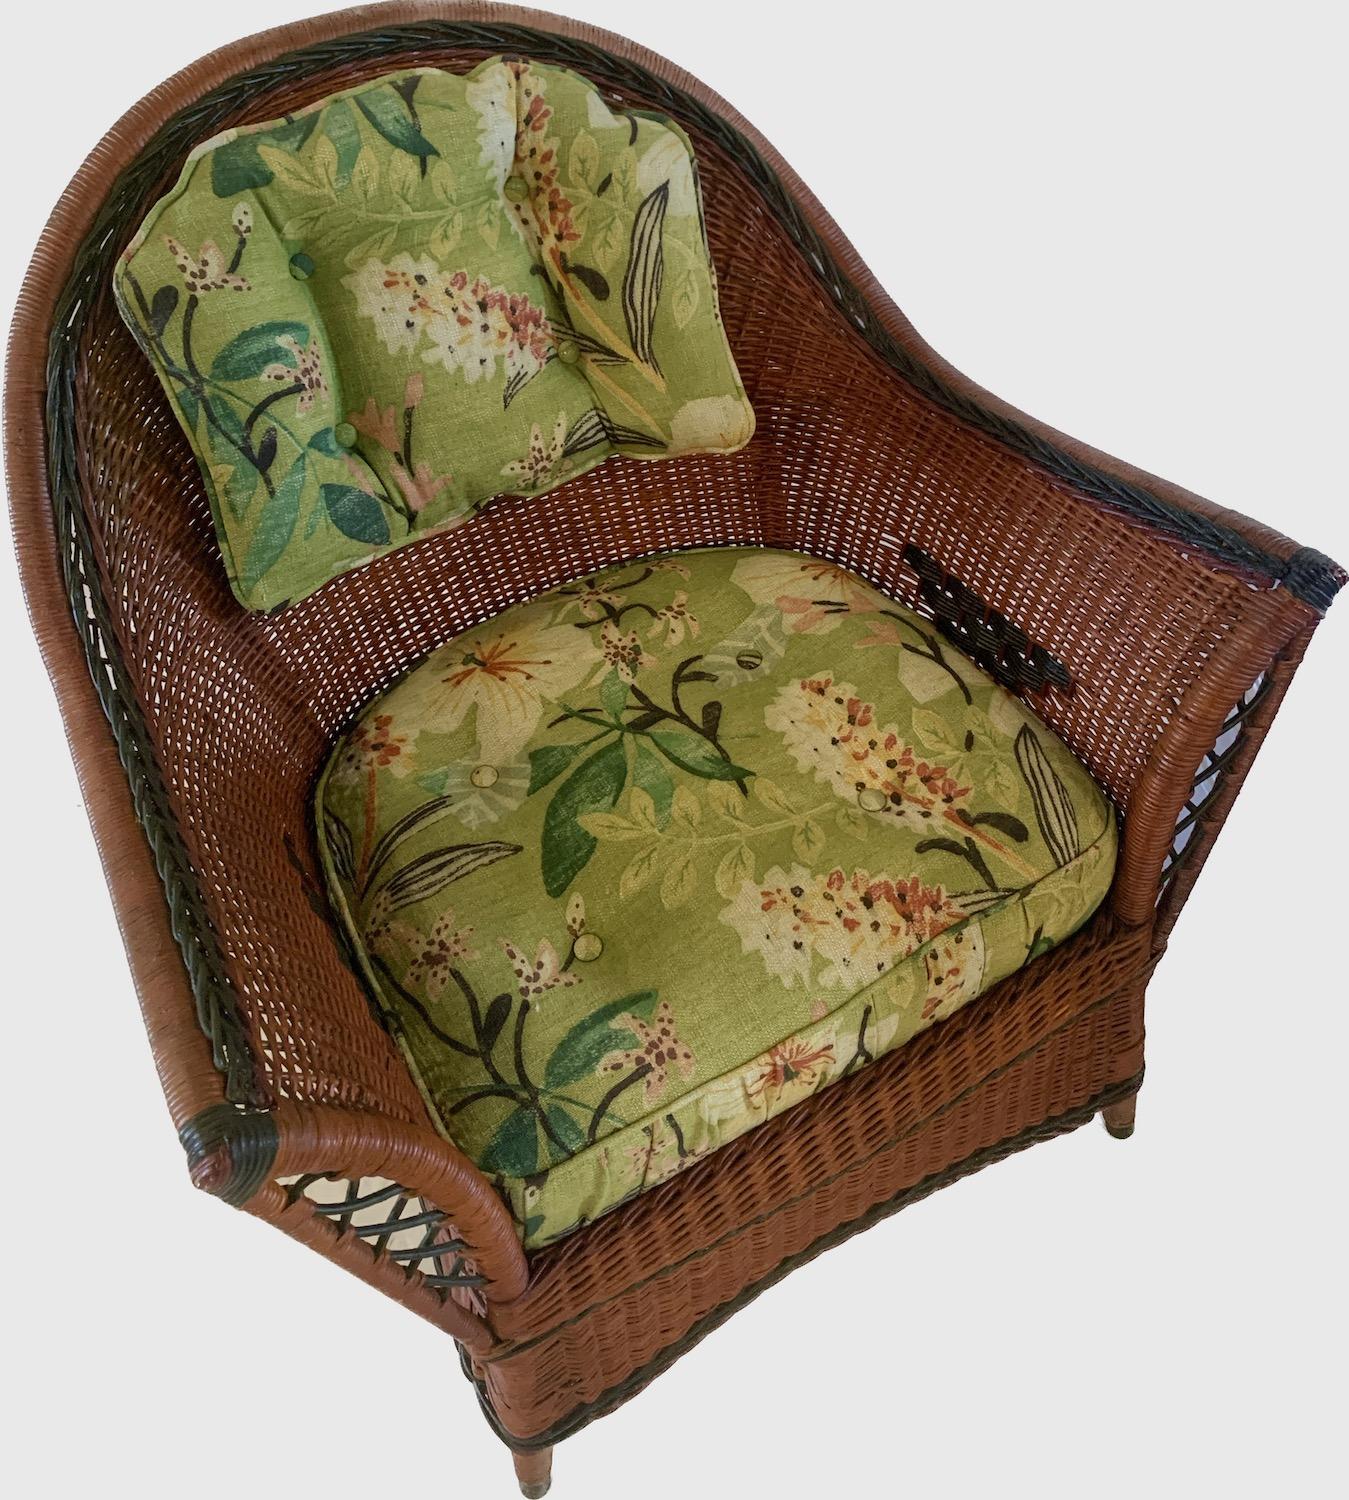 This is a particularly good looking natural finished wicker arm chair having paint decorated trim and design.This was made by the Heywood Wakefield Company in Gardner Massachusetts in the late teens or early 1920s. it is  a good size and very